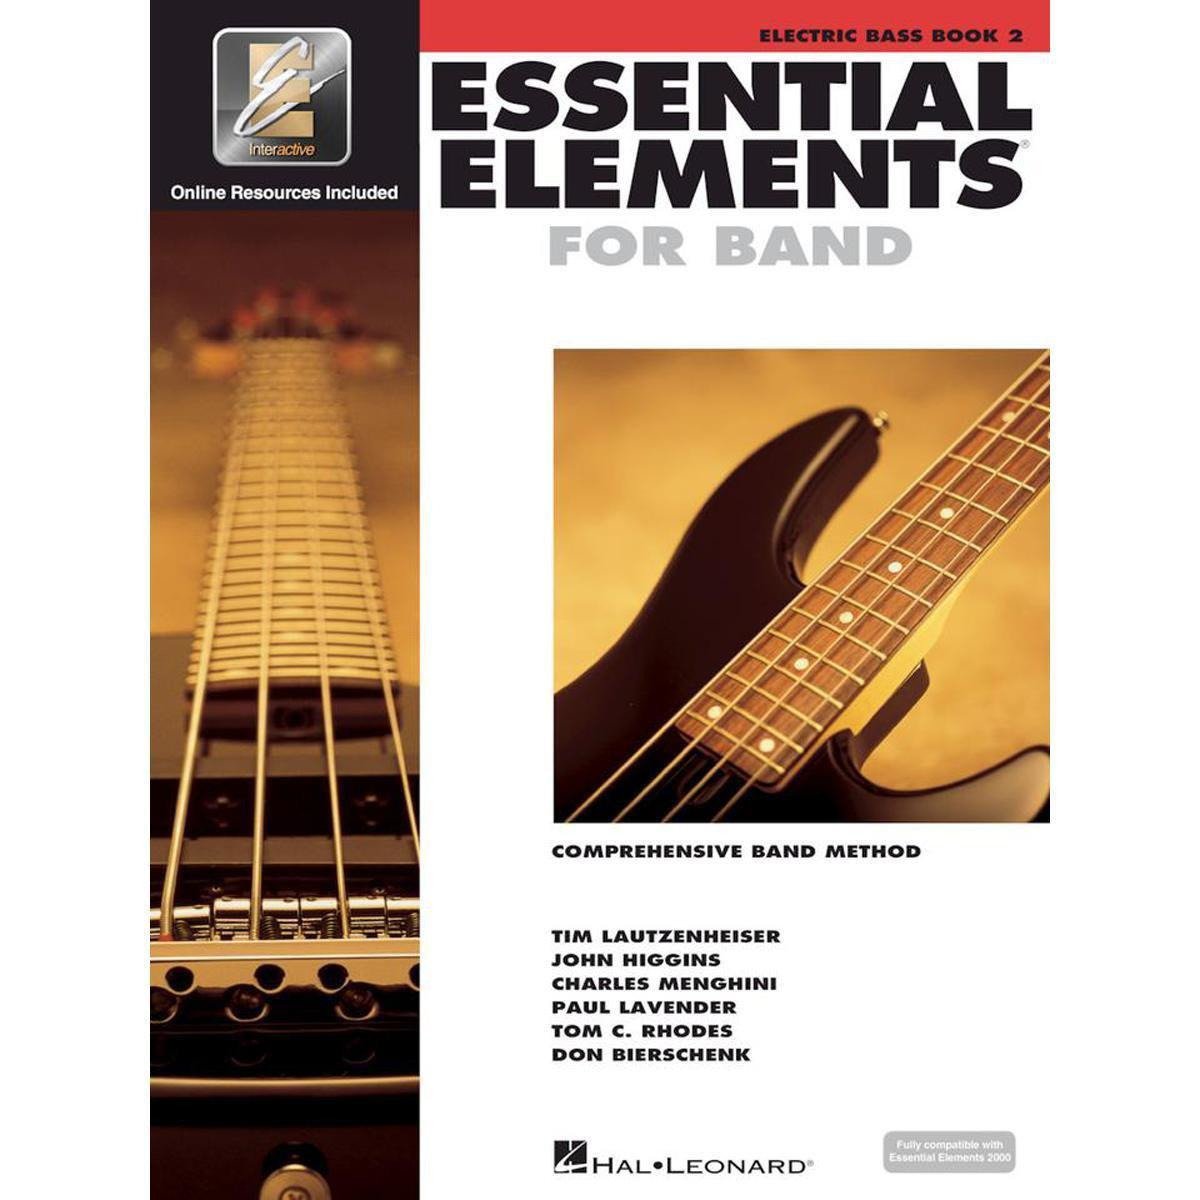 Essential Elements for Band Book 2-Electric Bass-Andy's Music